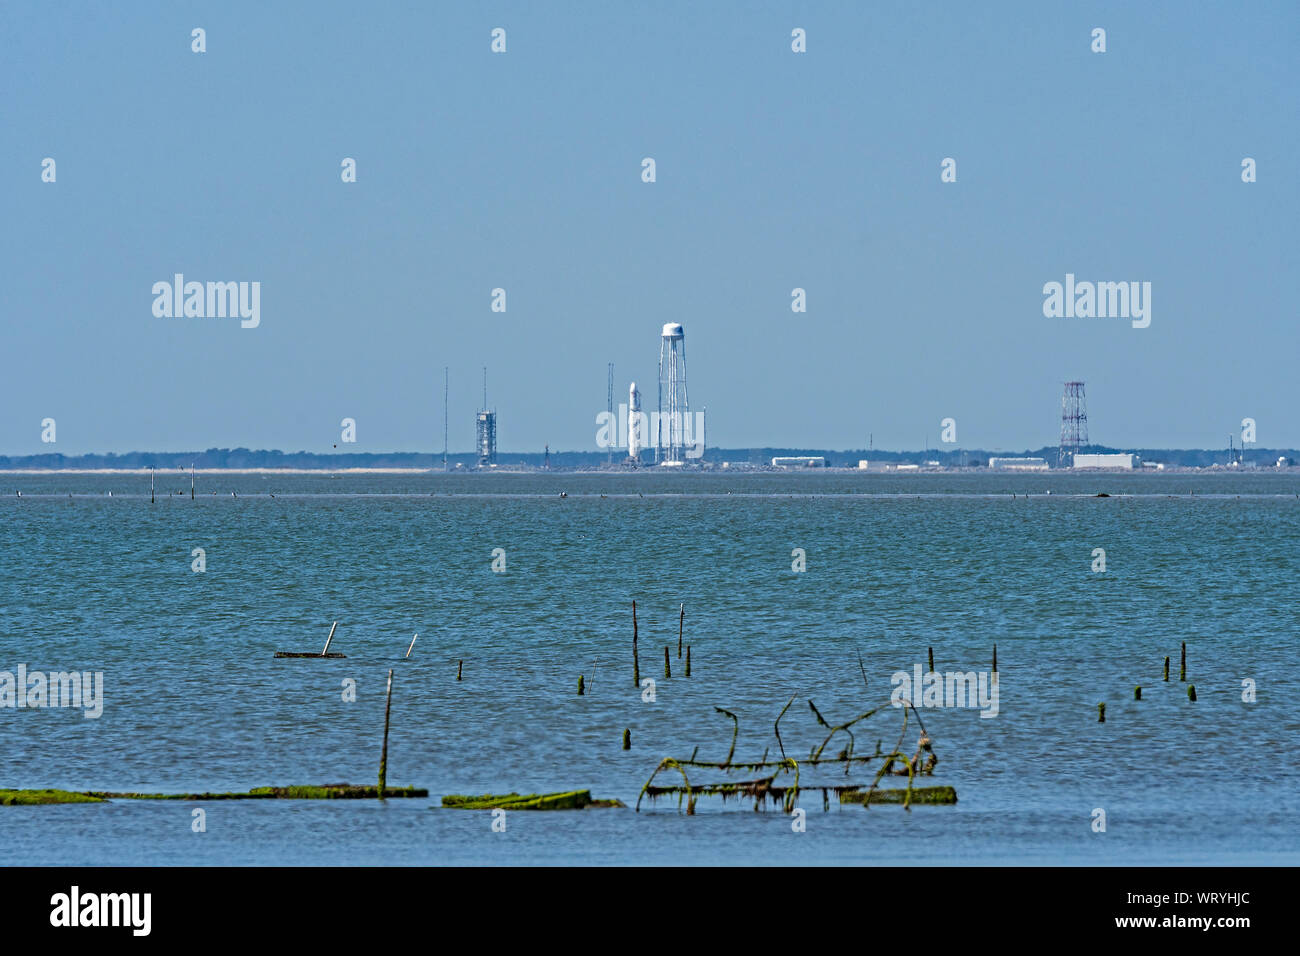 Rocket on the Pad for a Space Launch at Wallops Island in Virginia Stock Photo